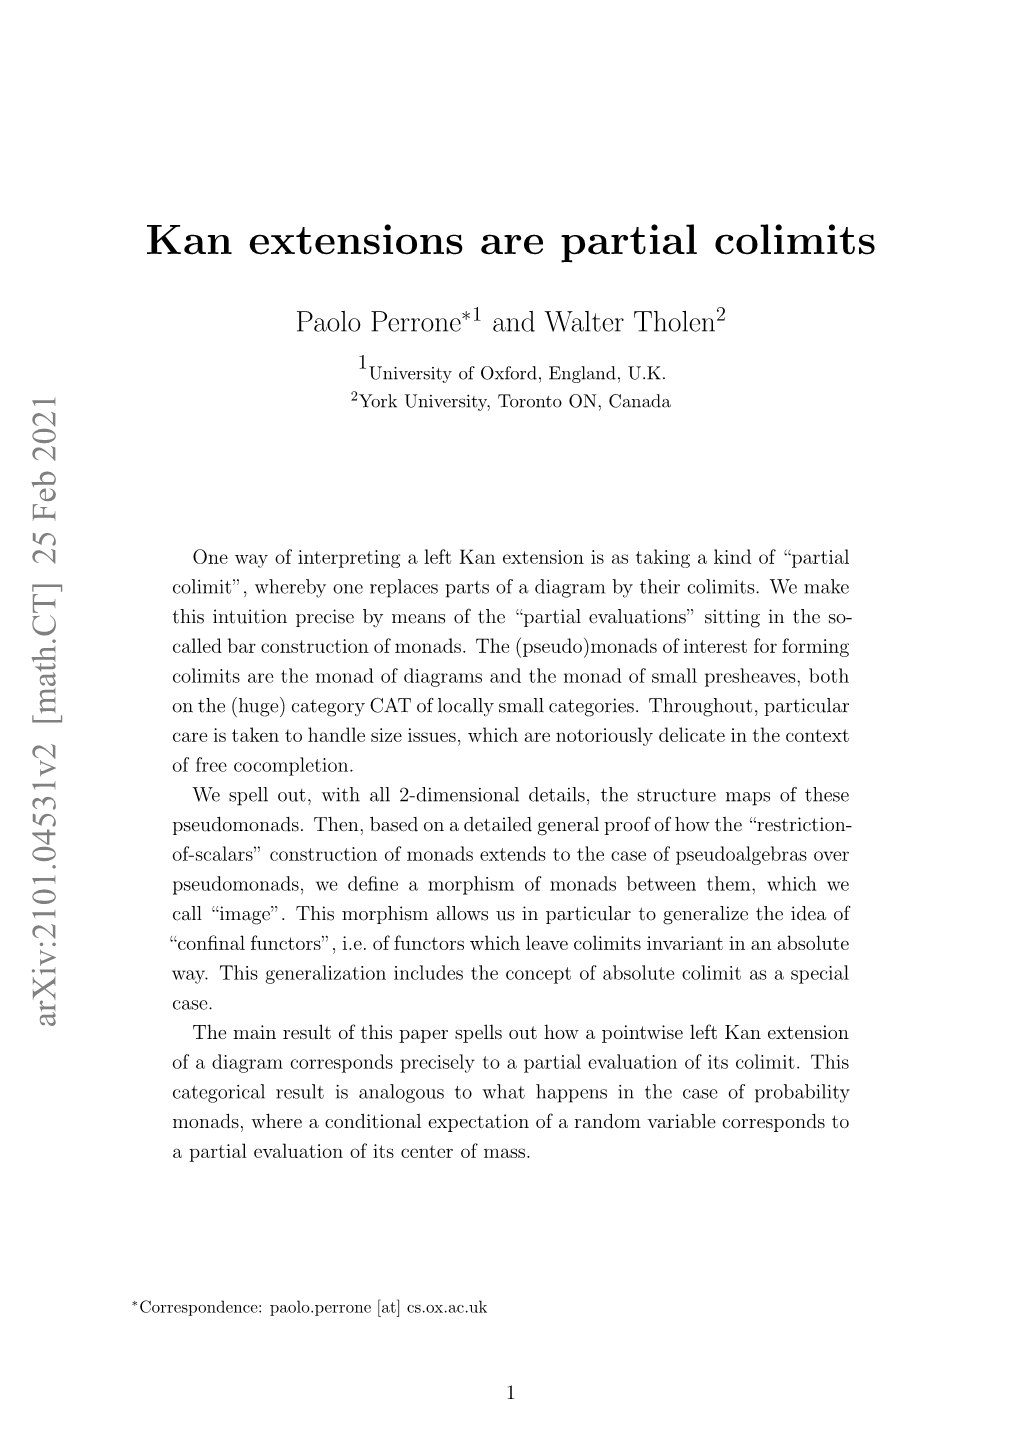 Kan Extensions Are Partial Colimits, As Claimed by the Paper’S Title